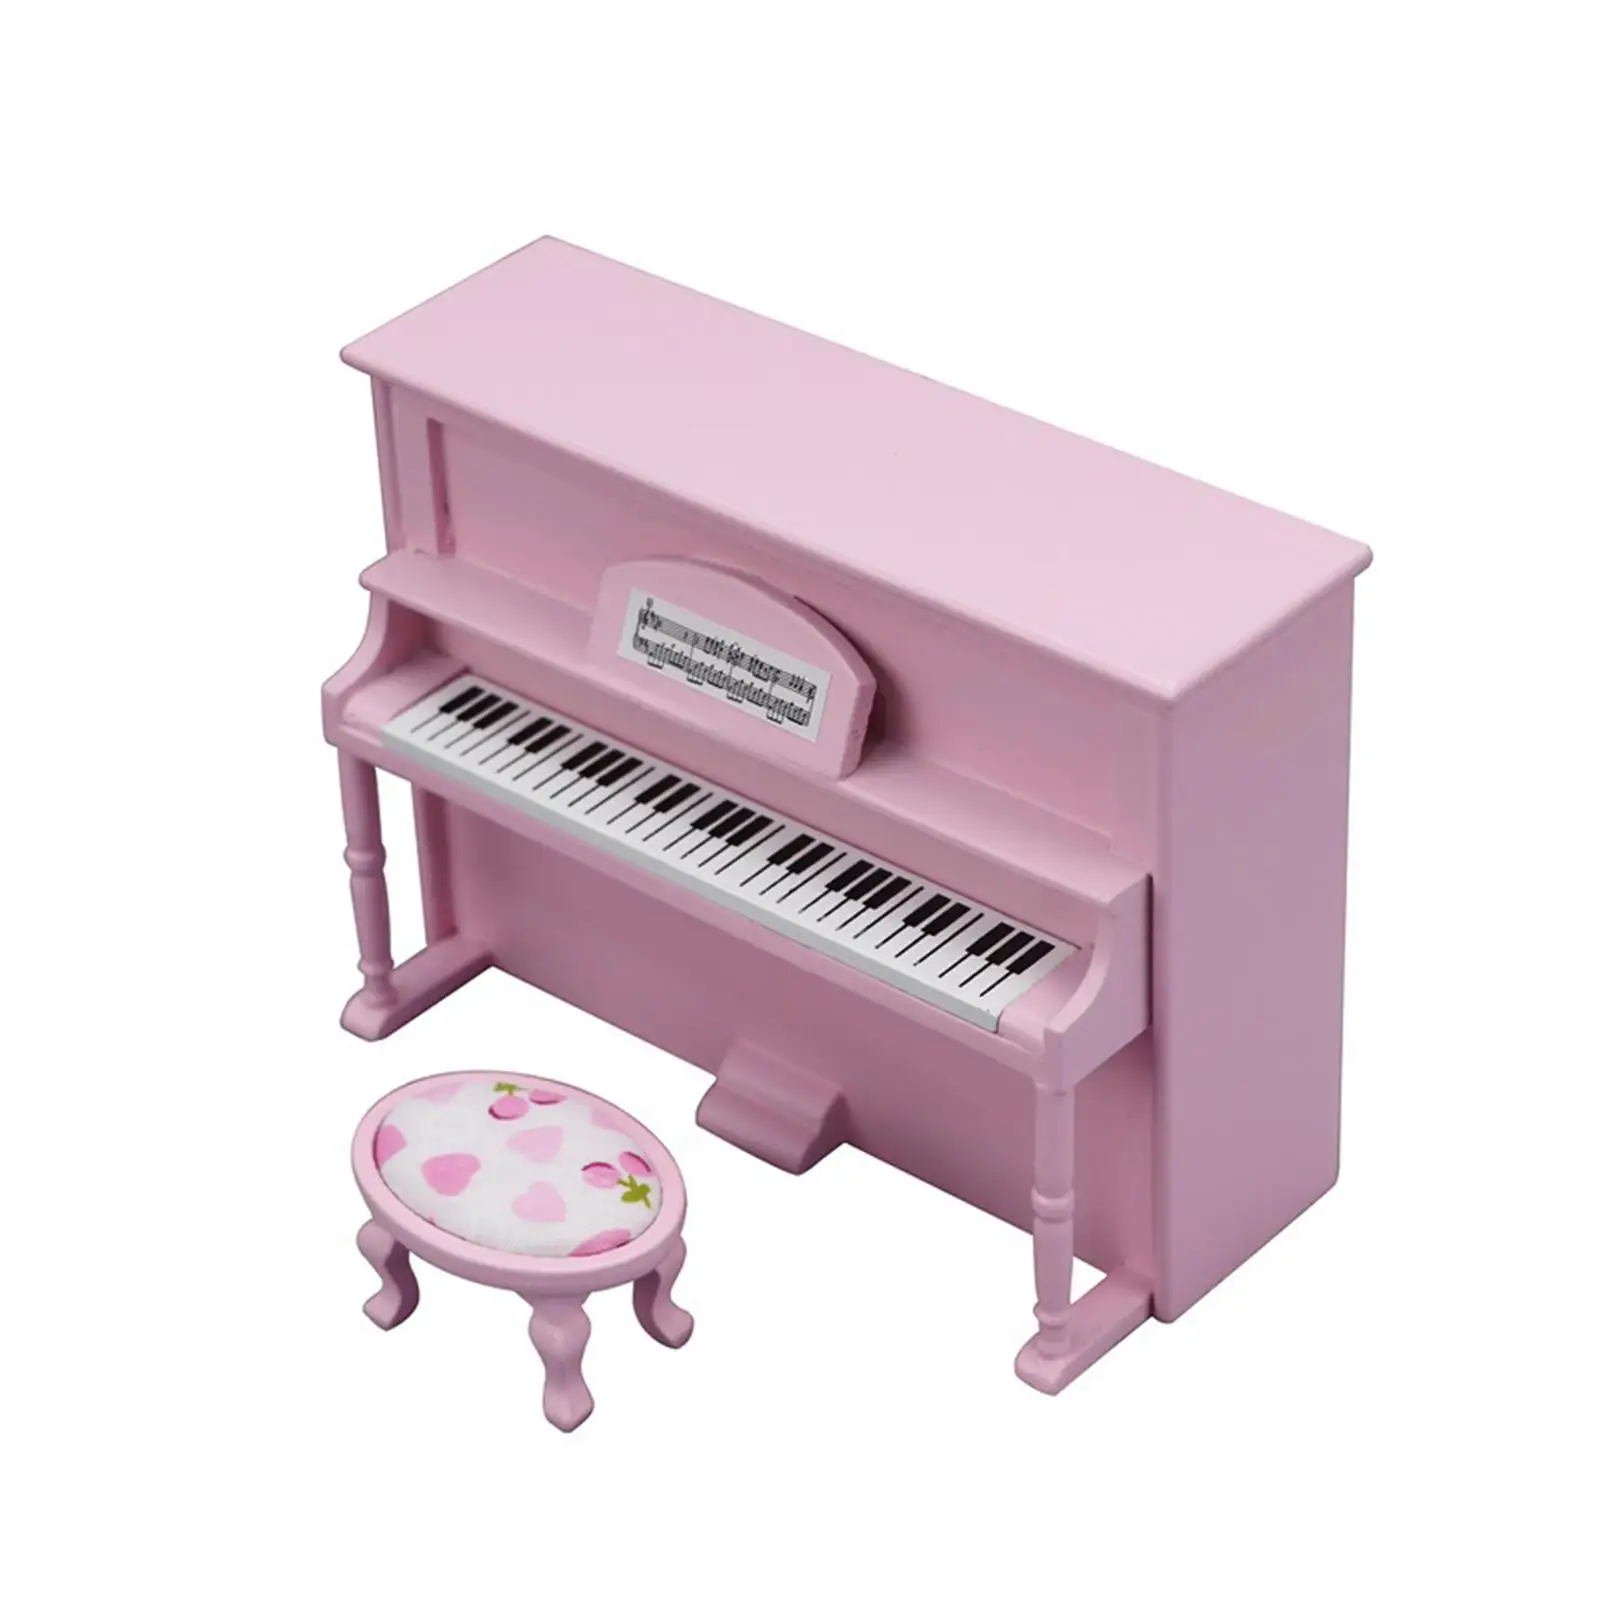 1:12 Scale Miniature Piano Model with Chair Micro Landscape Home Wooden Dollhouse Musical Instrument Desk Ornaments Decor